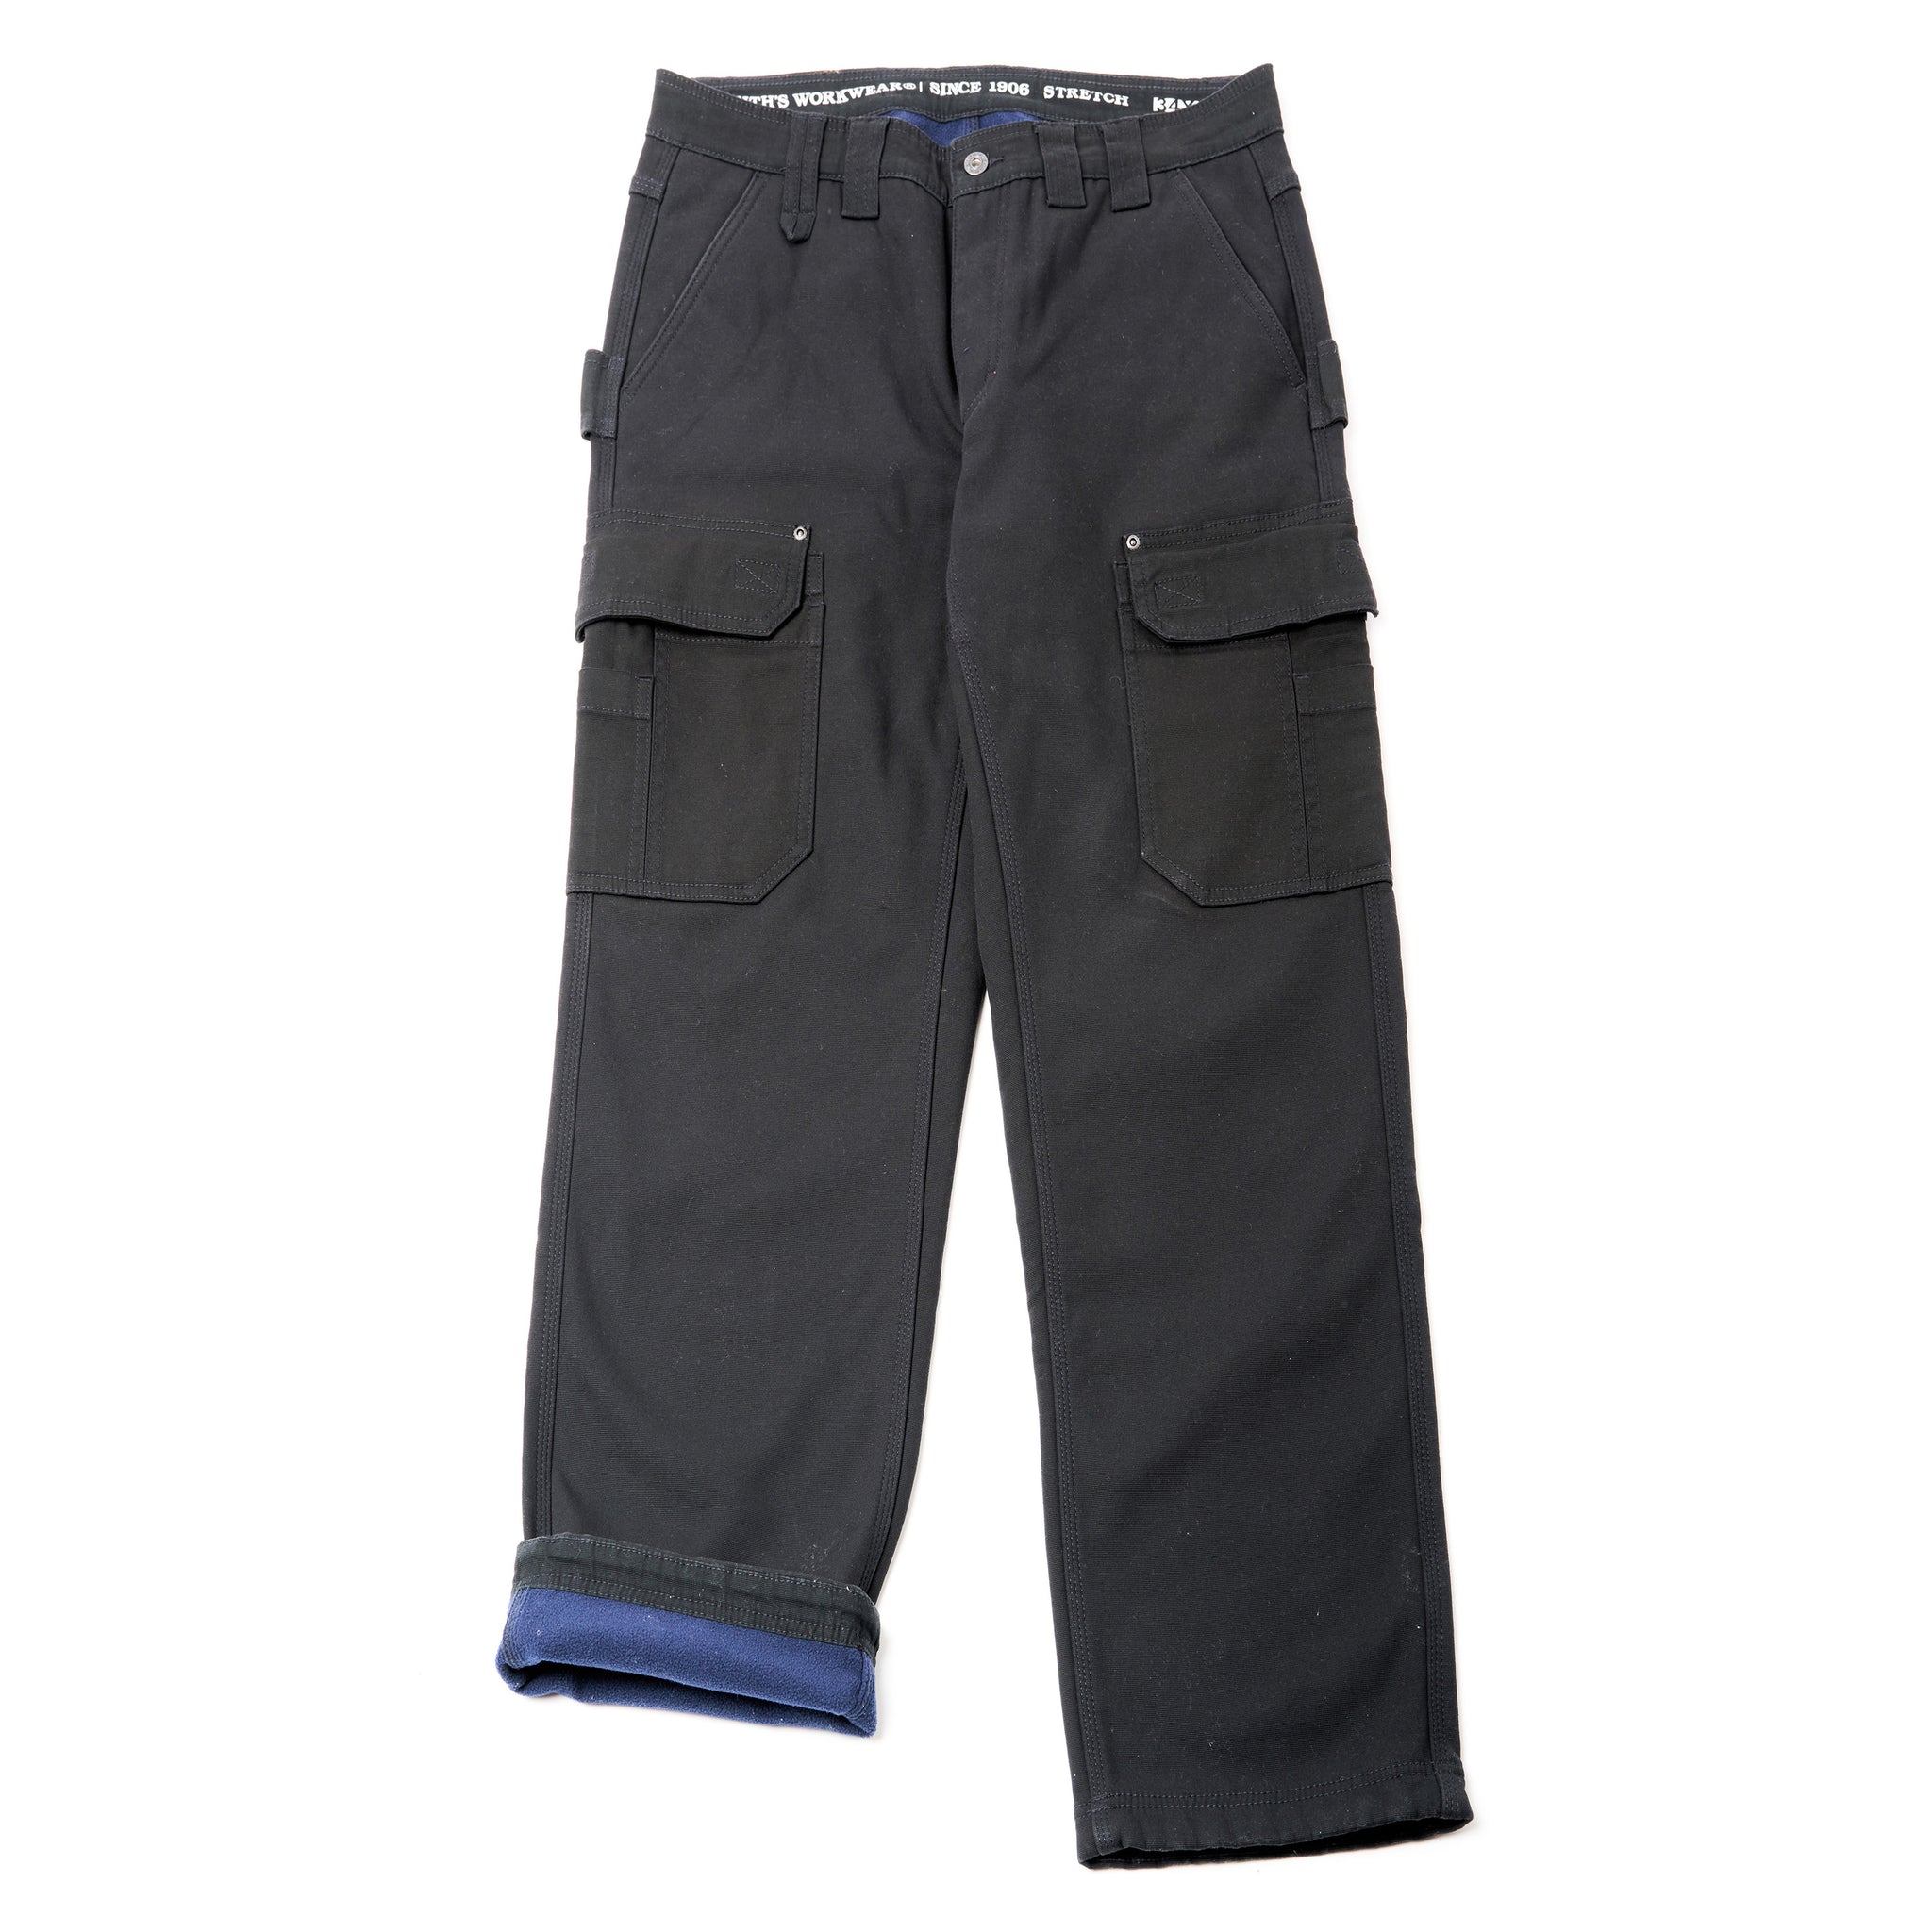 BONDED-FLEECE LINED WORK-STRETCH DUCK CANVAS GUSSET UTILITY CARGO PANT